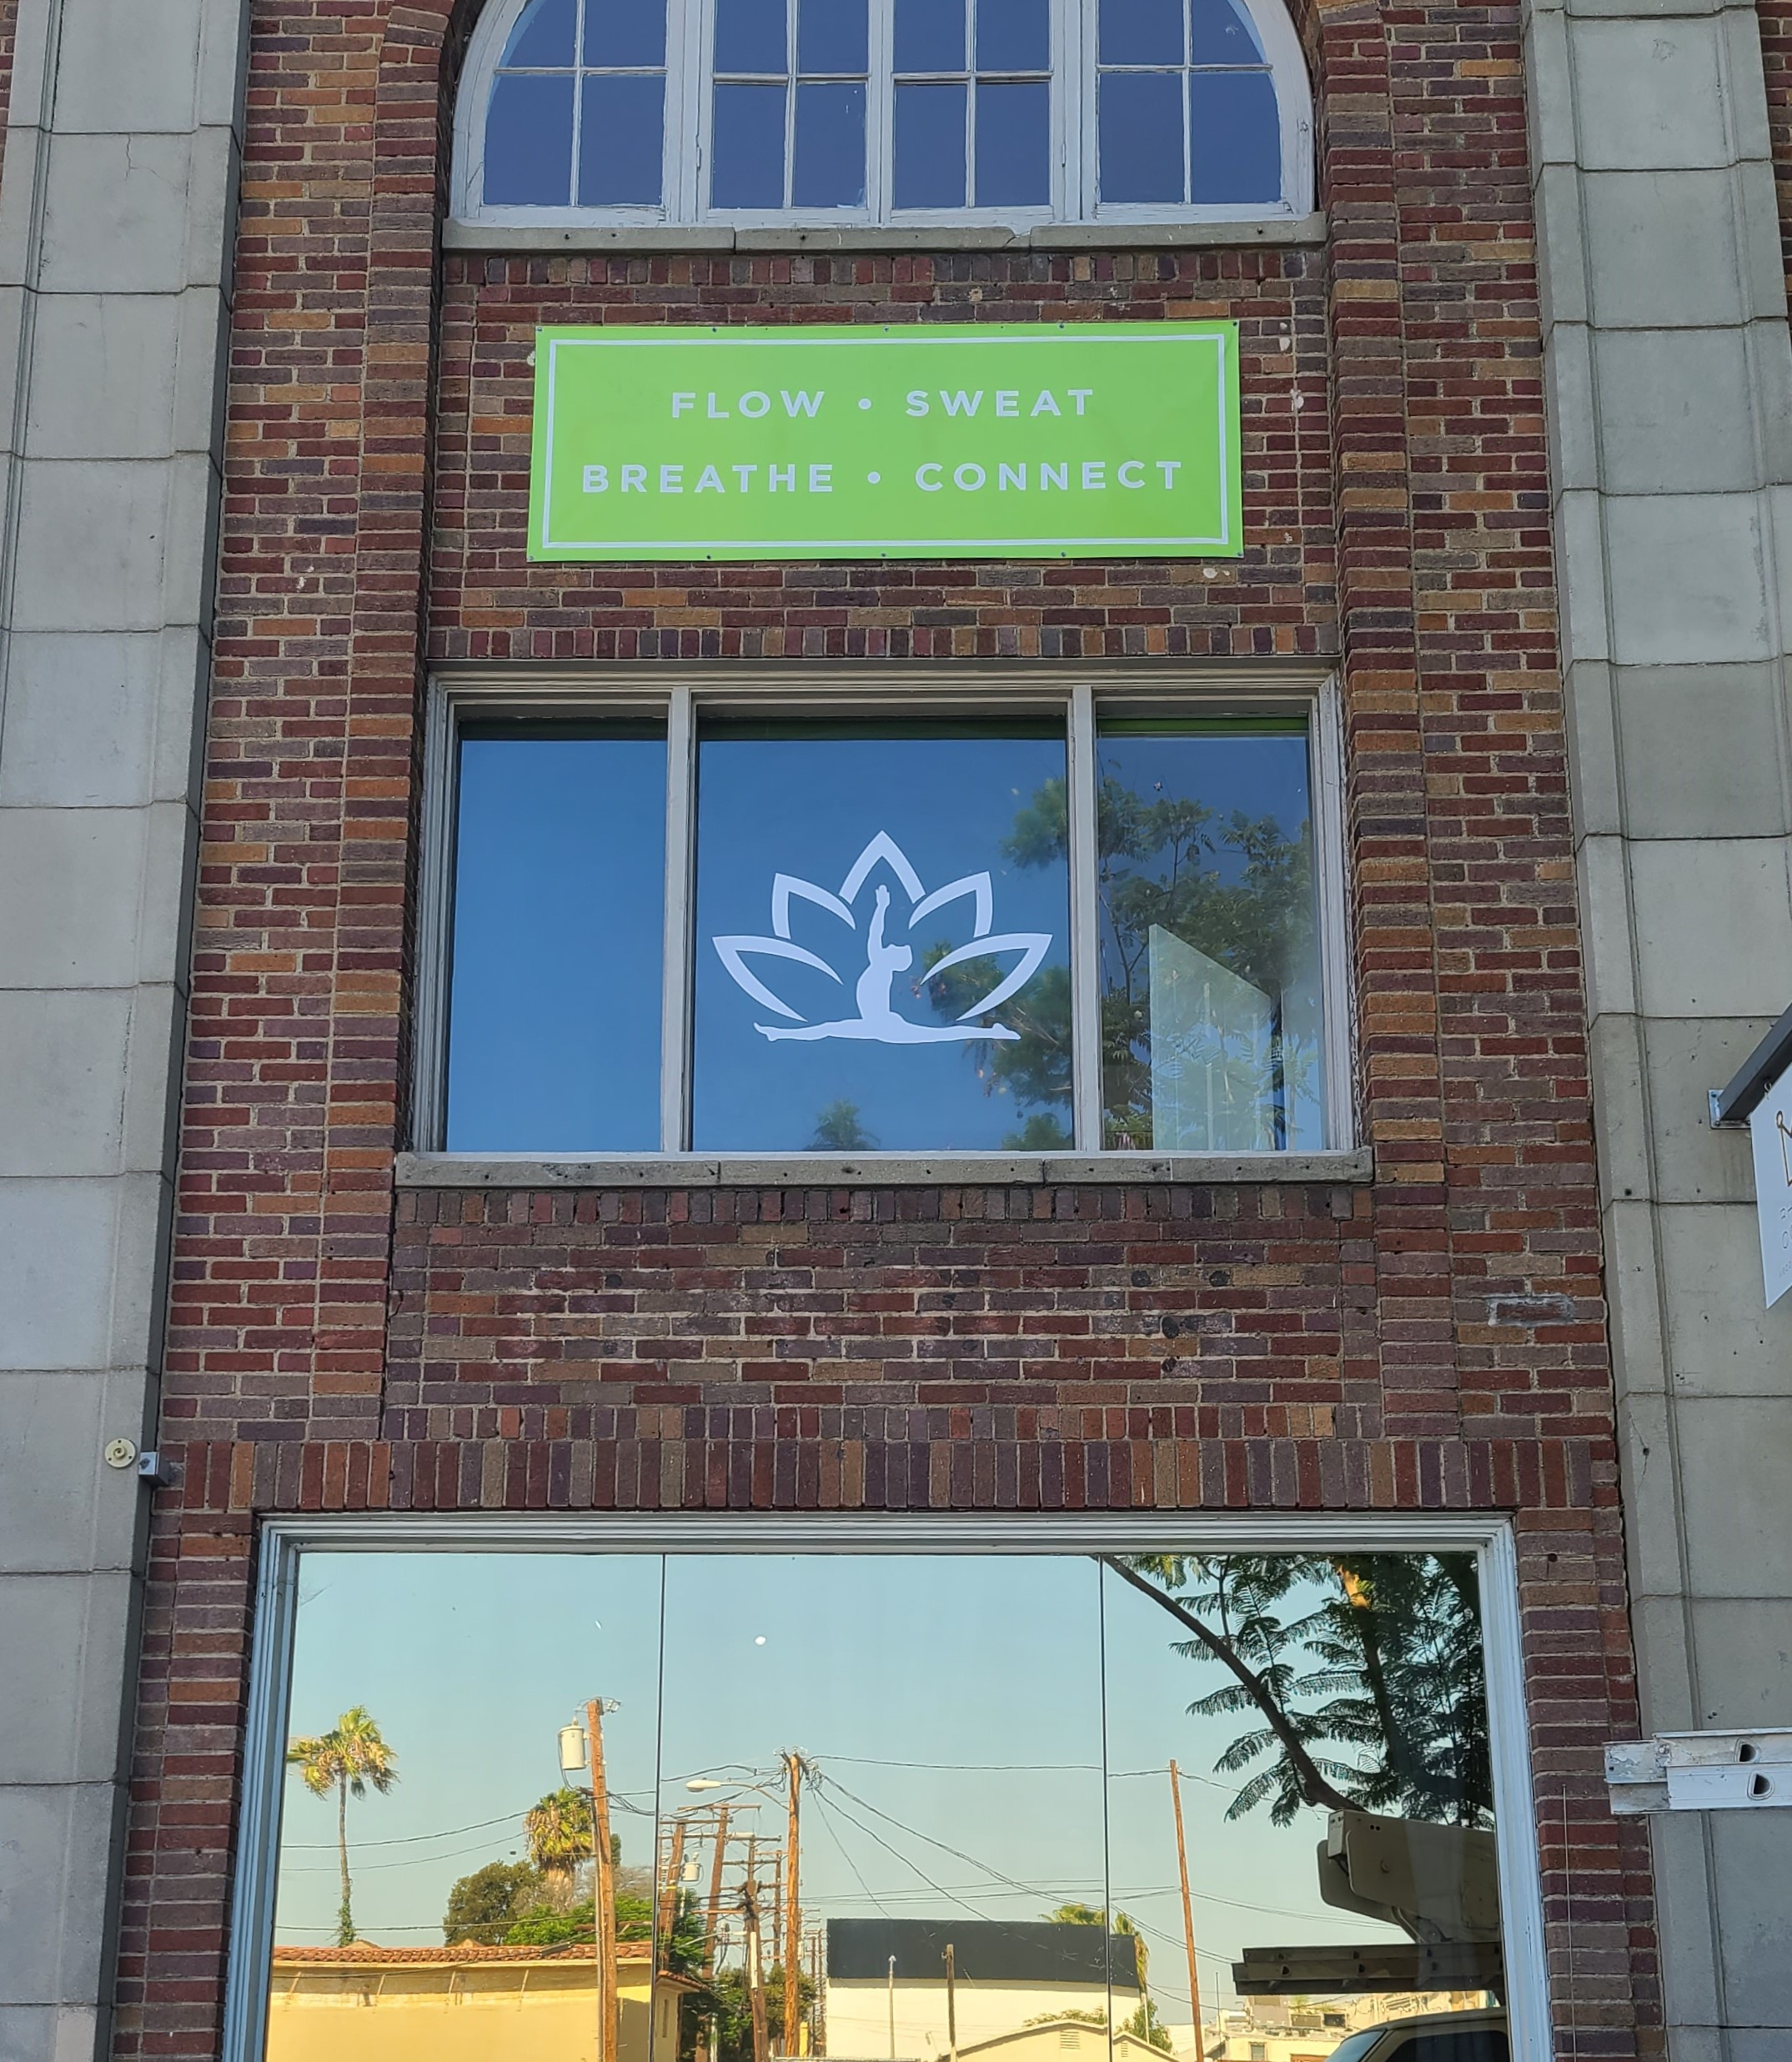 These studio window graphics compliment the other signage we installed for Shiva Yoga's West Hollywood space.